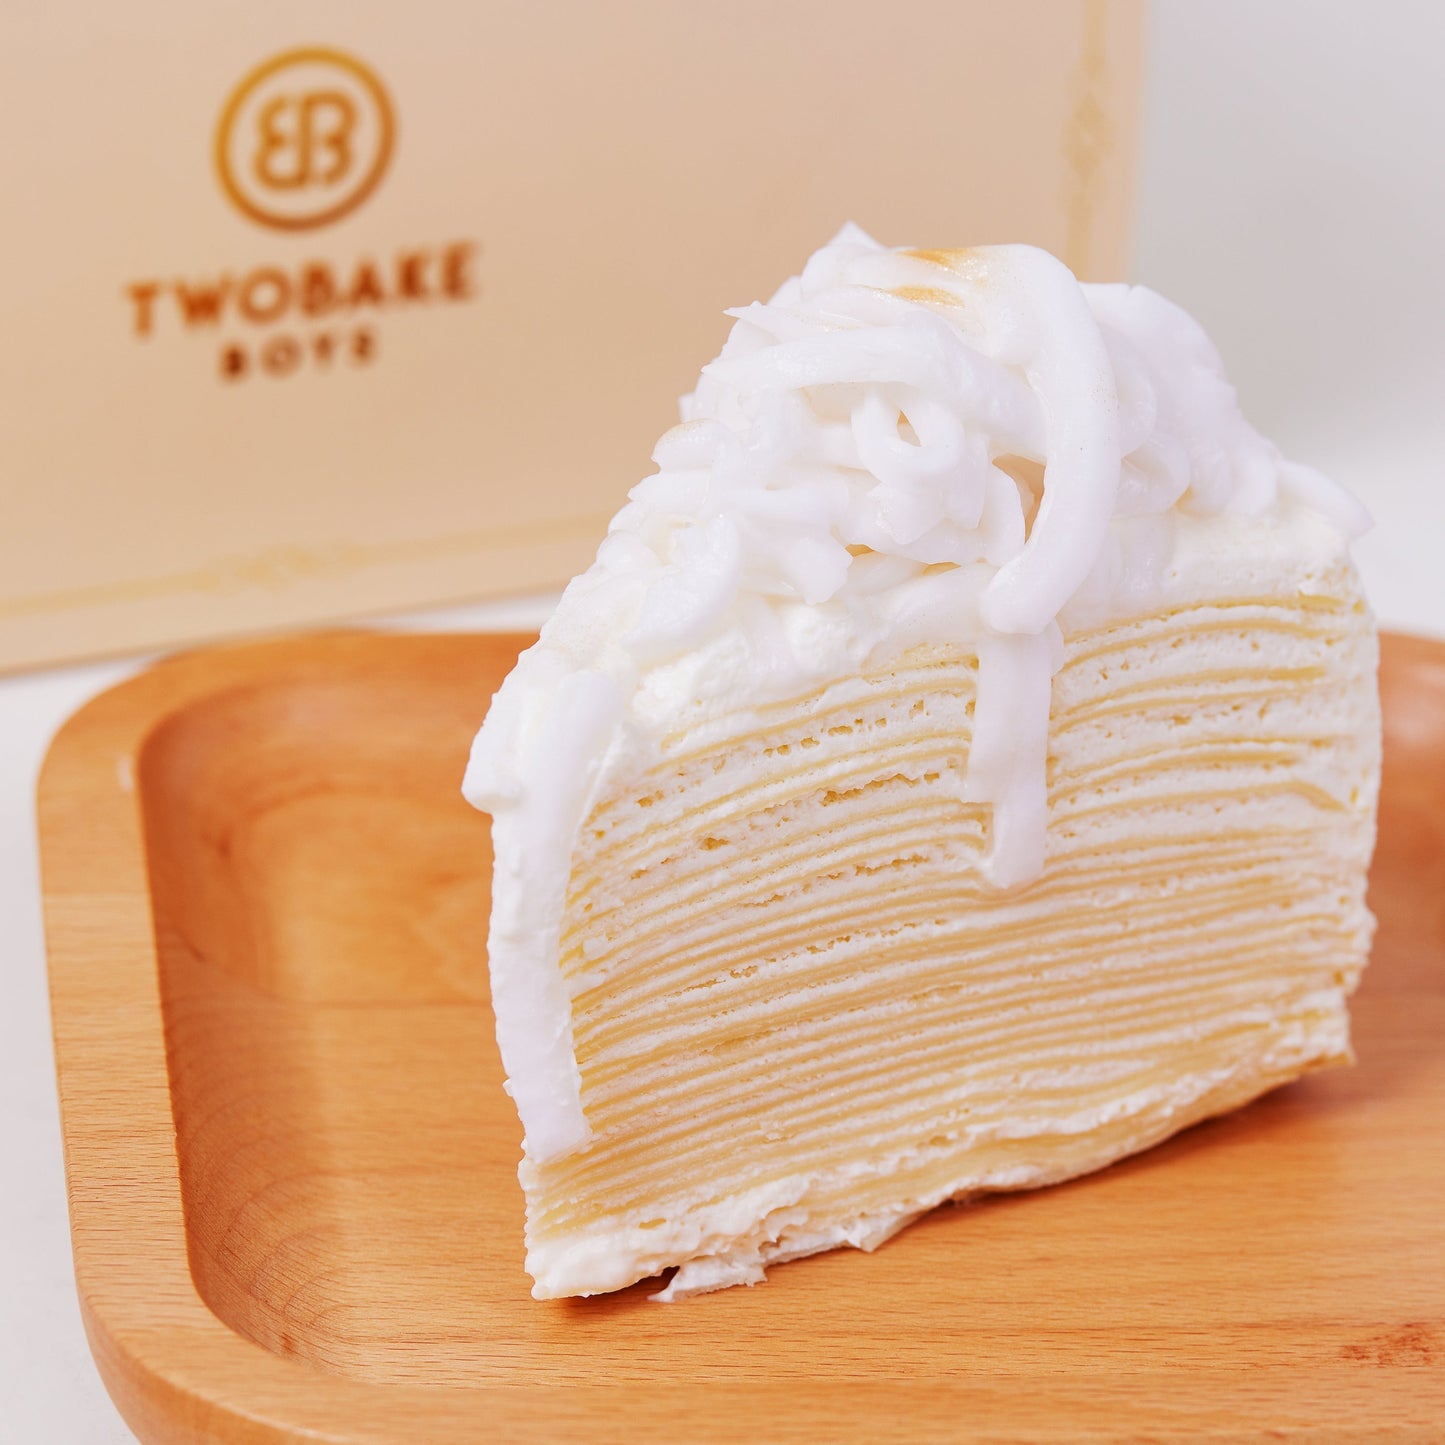 Coconut crepe cake 6" 🥥with coconut sauce suitable for 6-8 pax